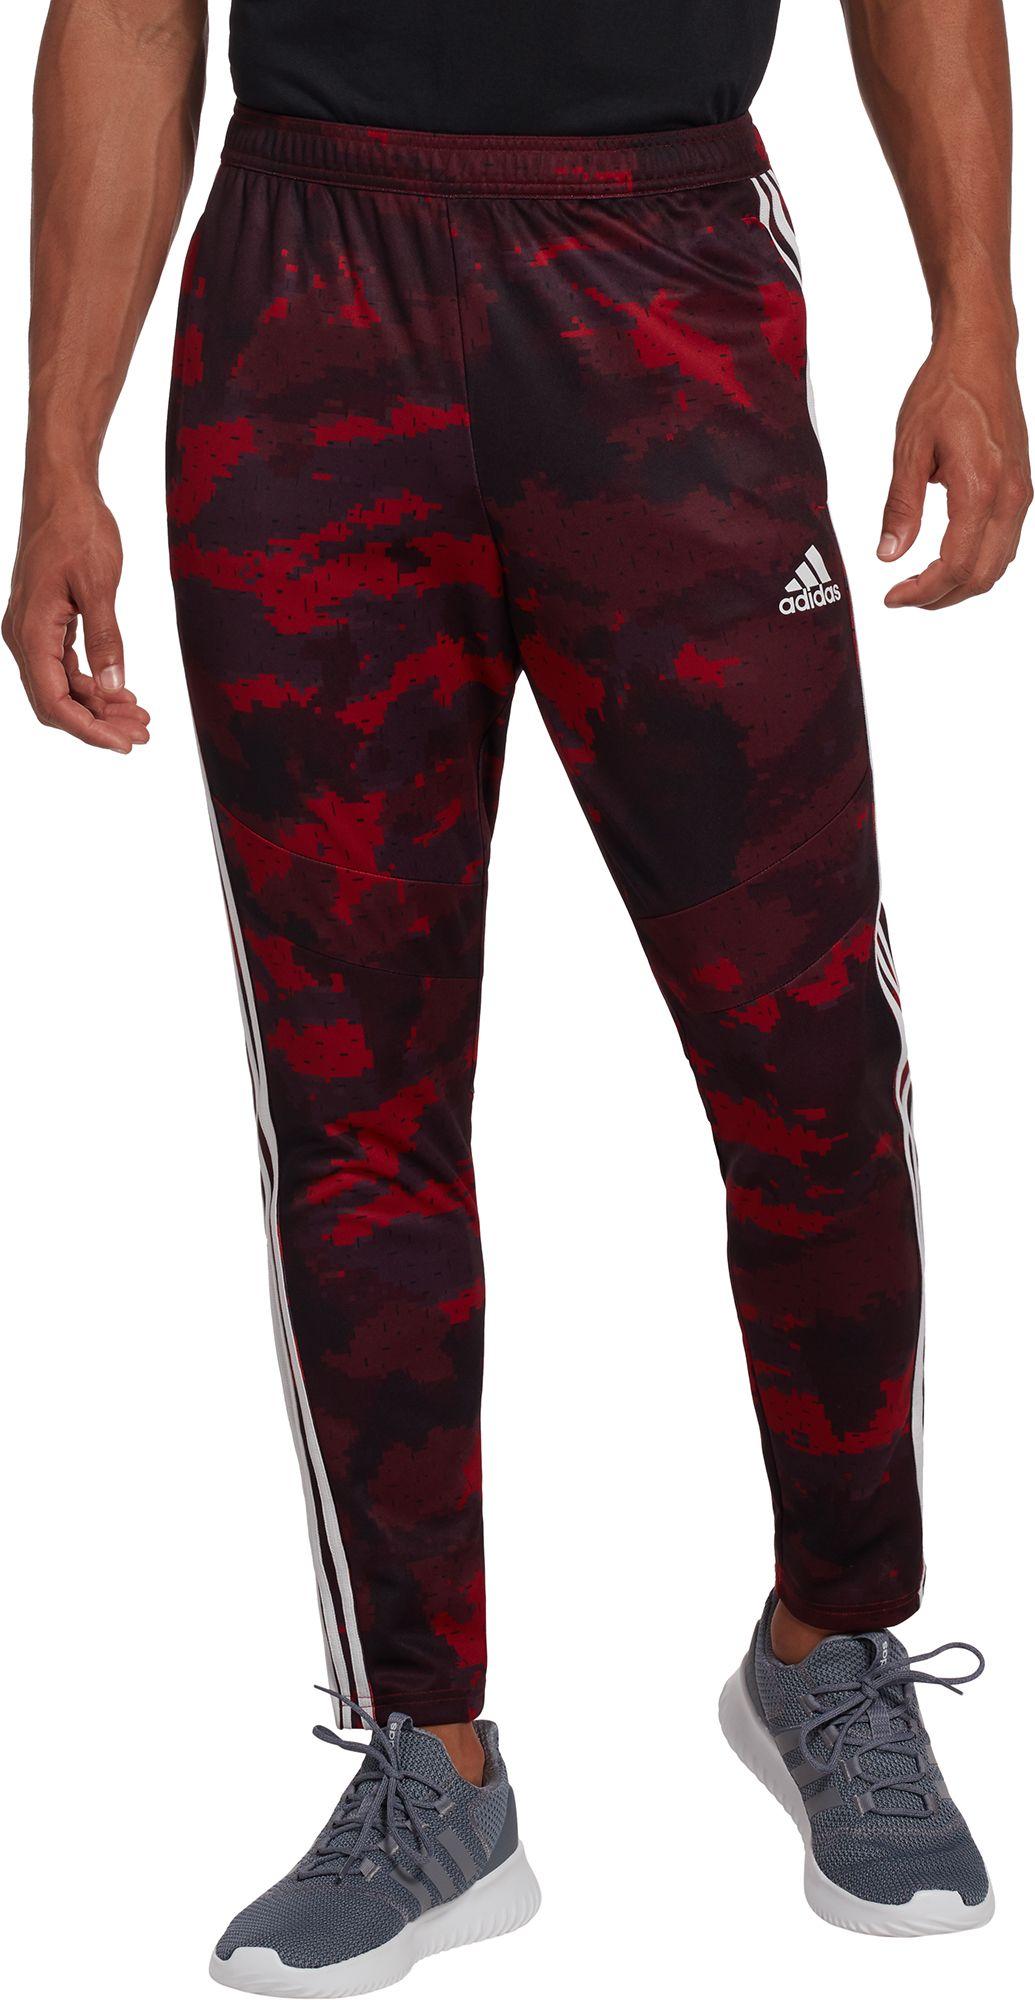 adidas Tiro 19 Camo Training Pants in Red for Men - Lyst